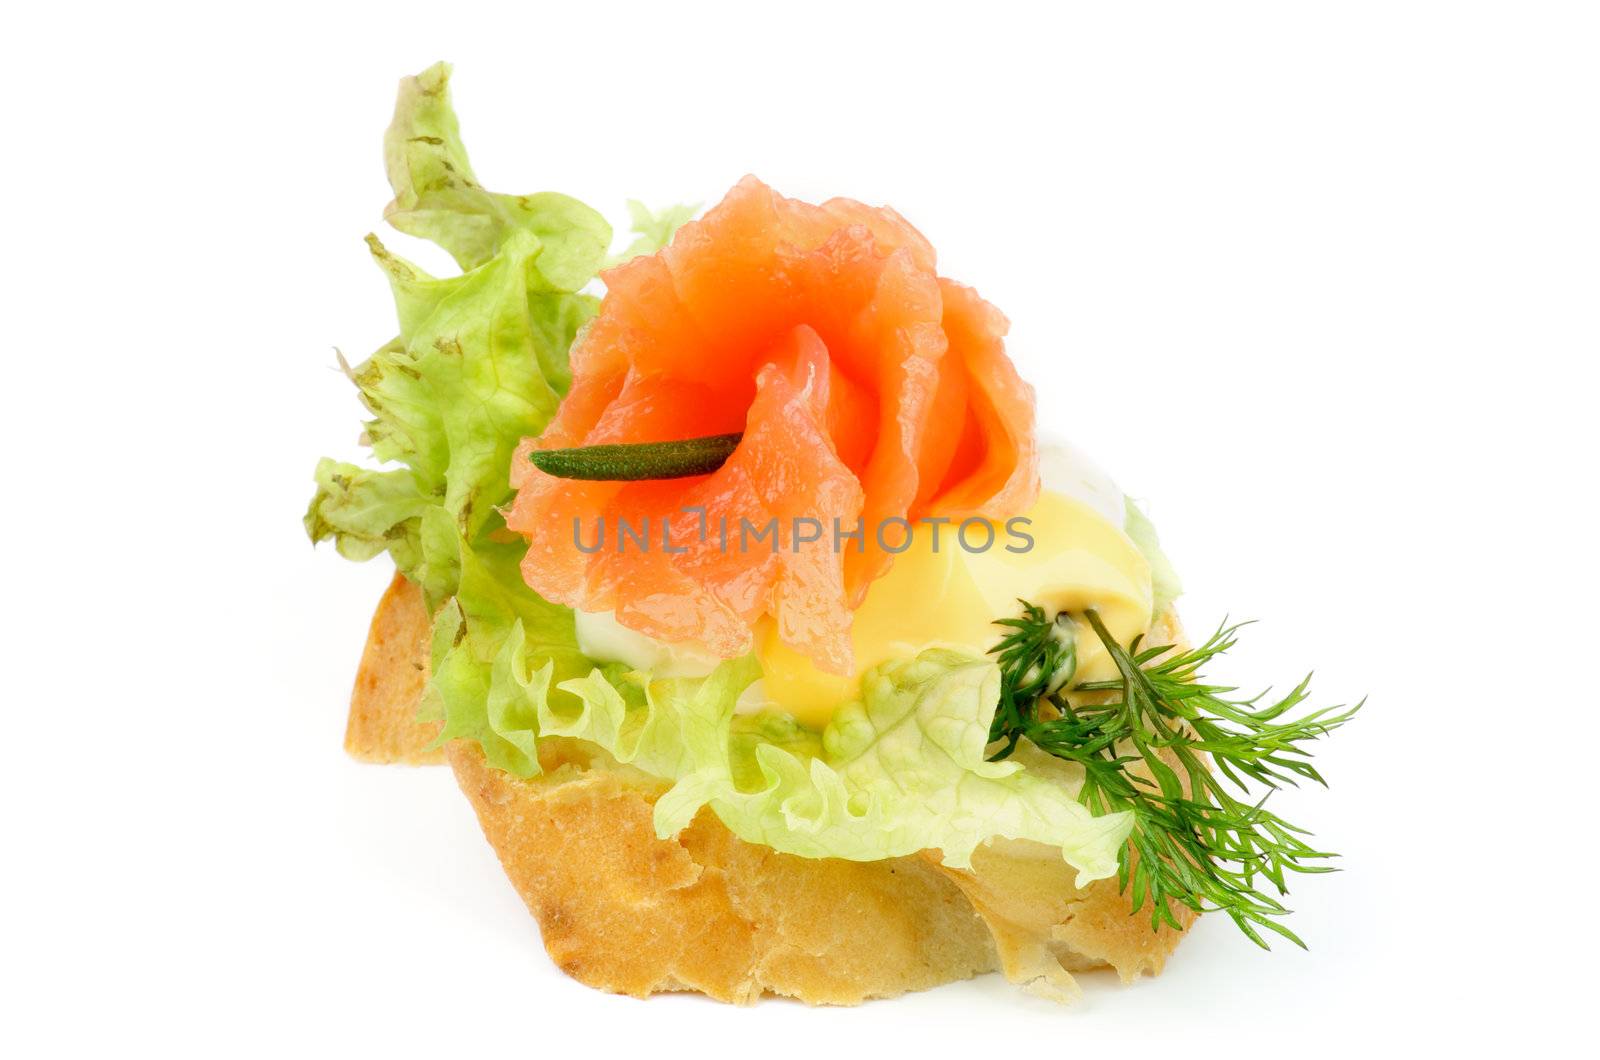 Smoked Salmon Snack with Lettuce, Dill, Rosemary and Cheese Sauce isolated on white background